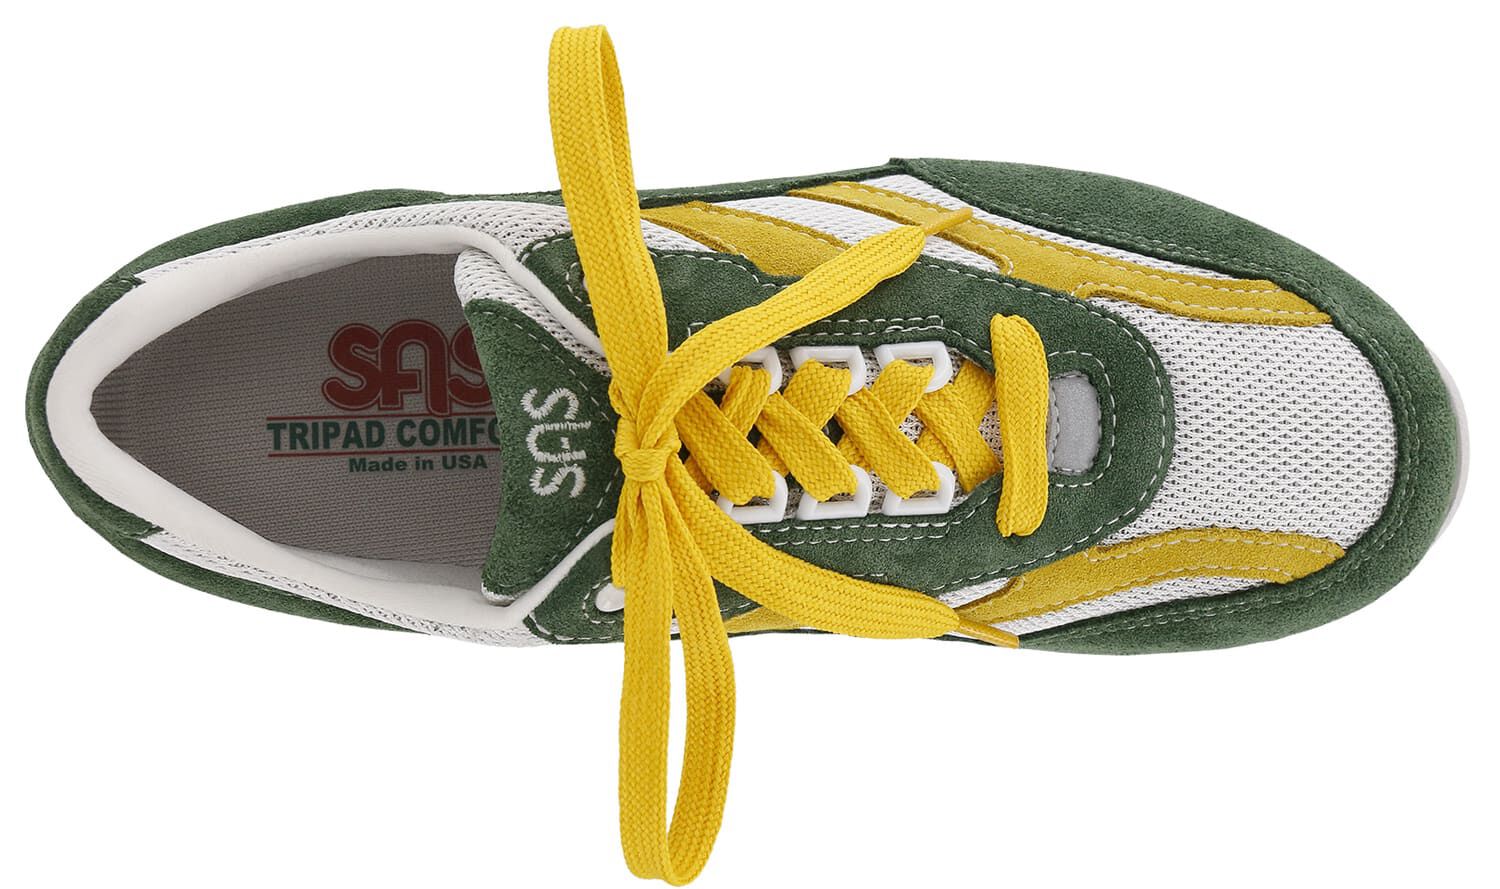 green and yellow tennis shoes